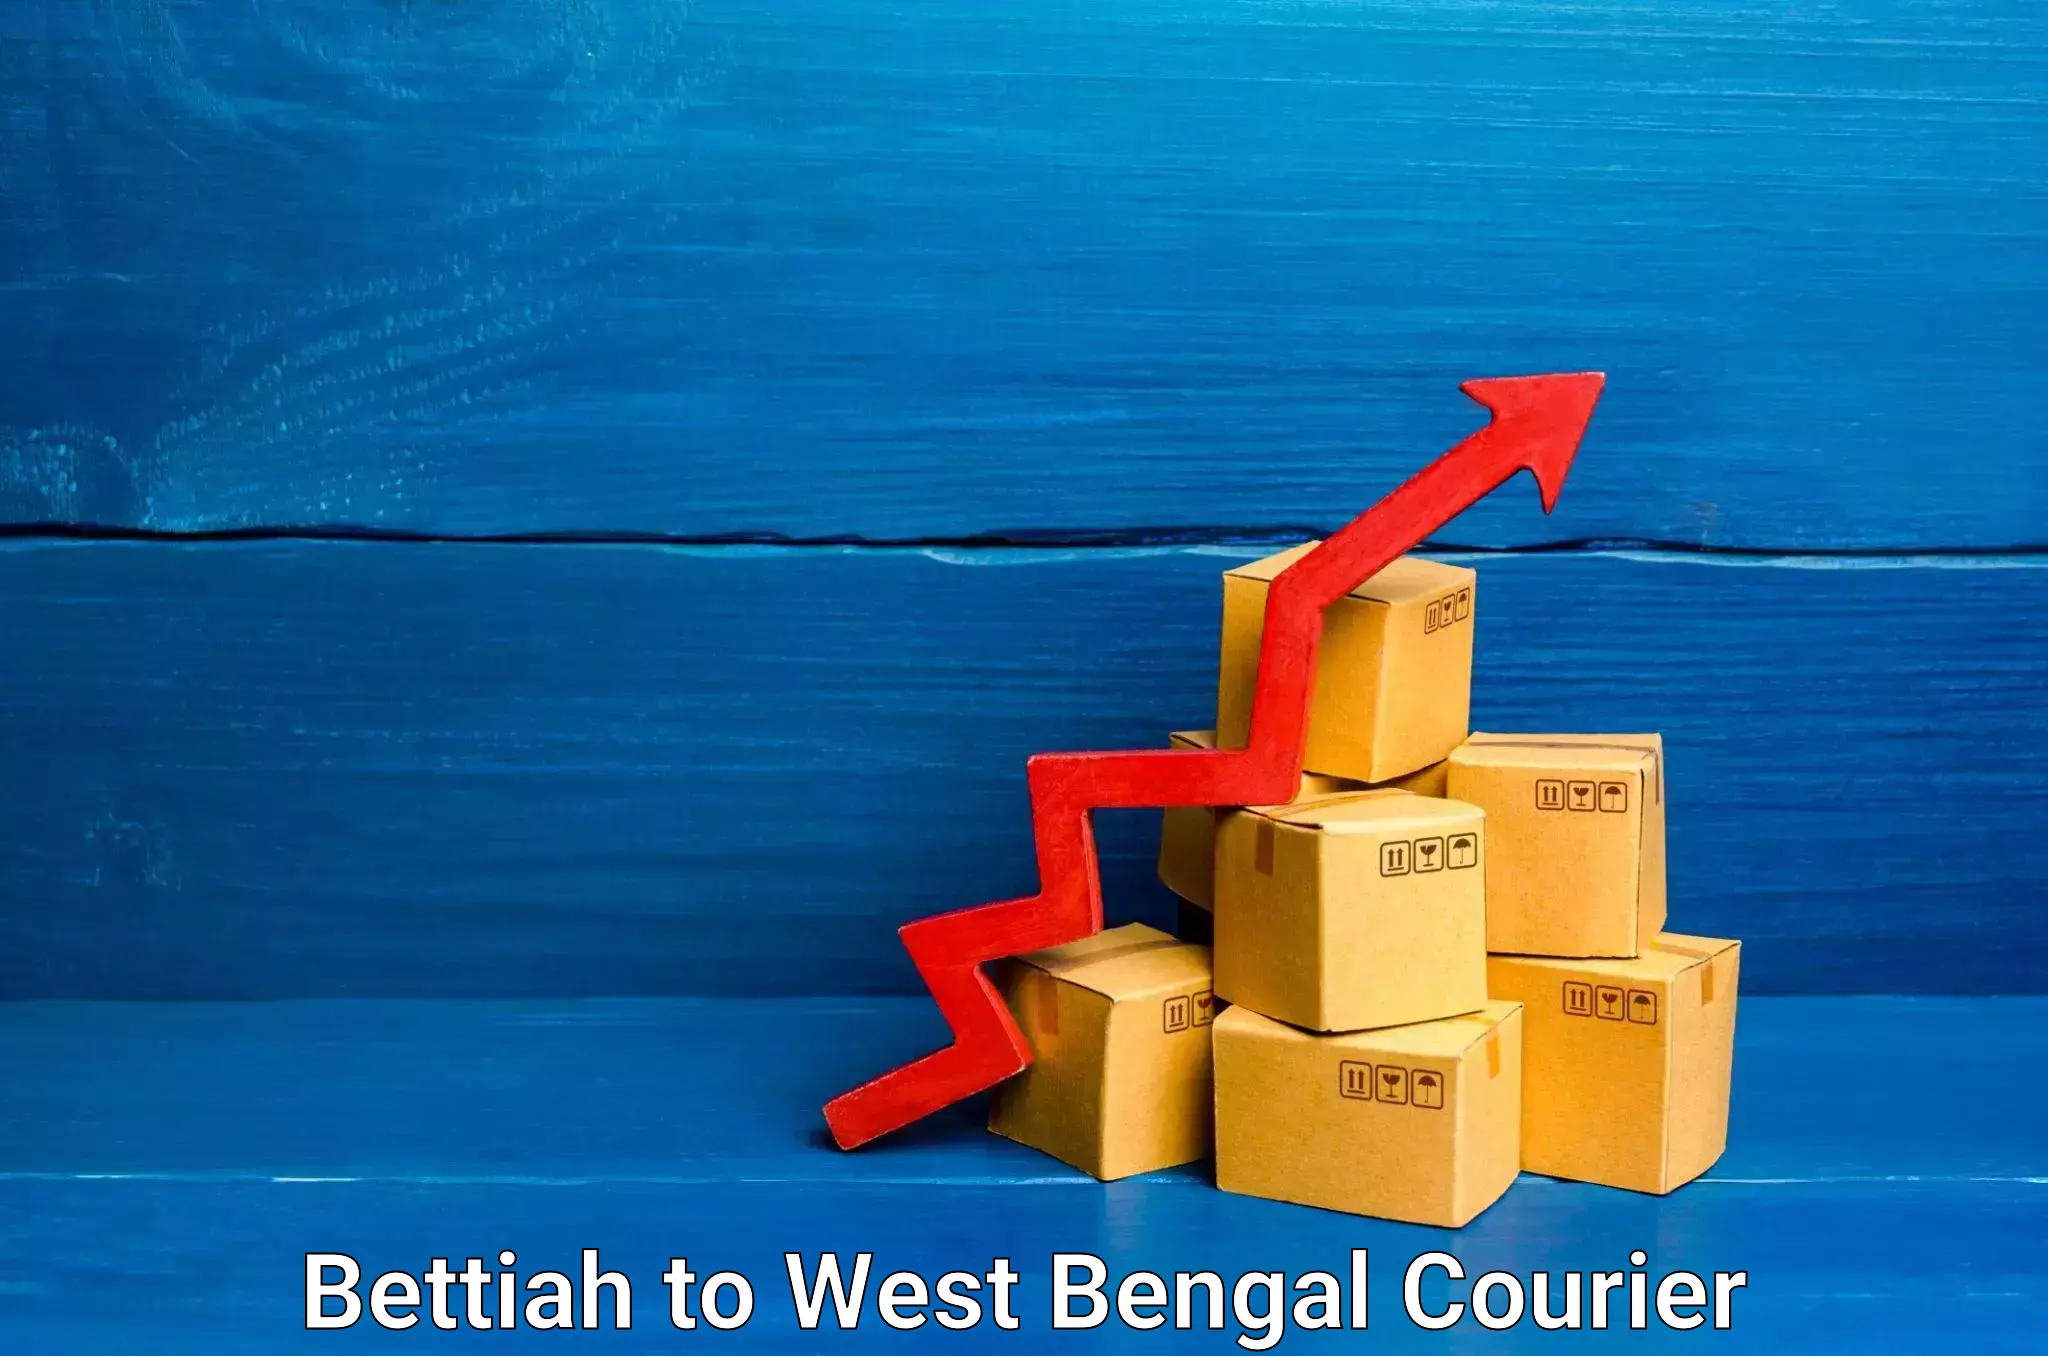 Furniture transport specialists Bettiah to West Bengal